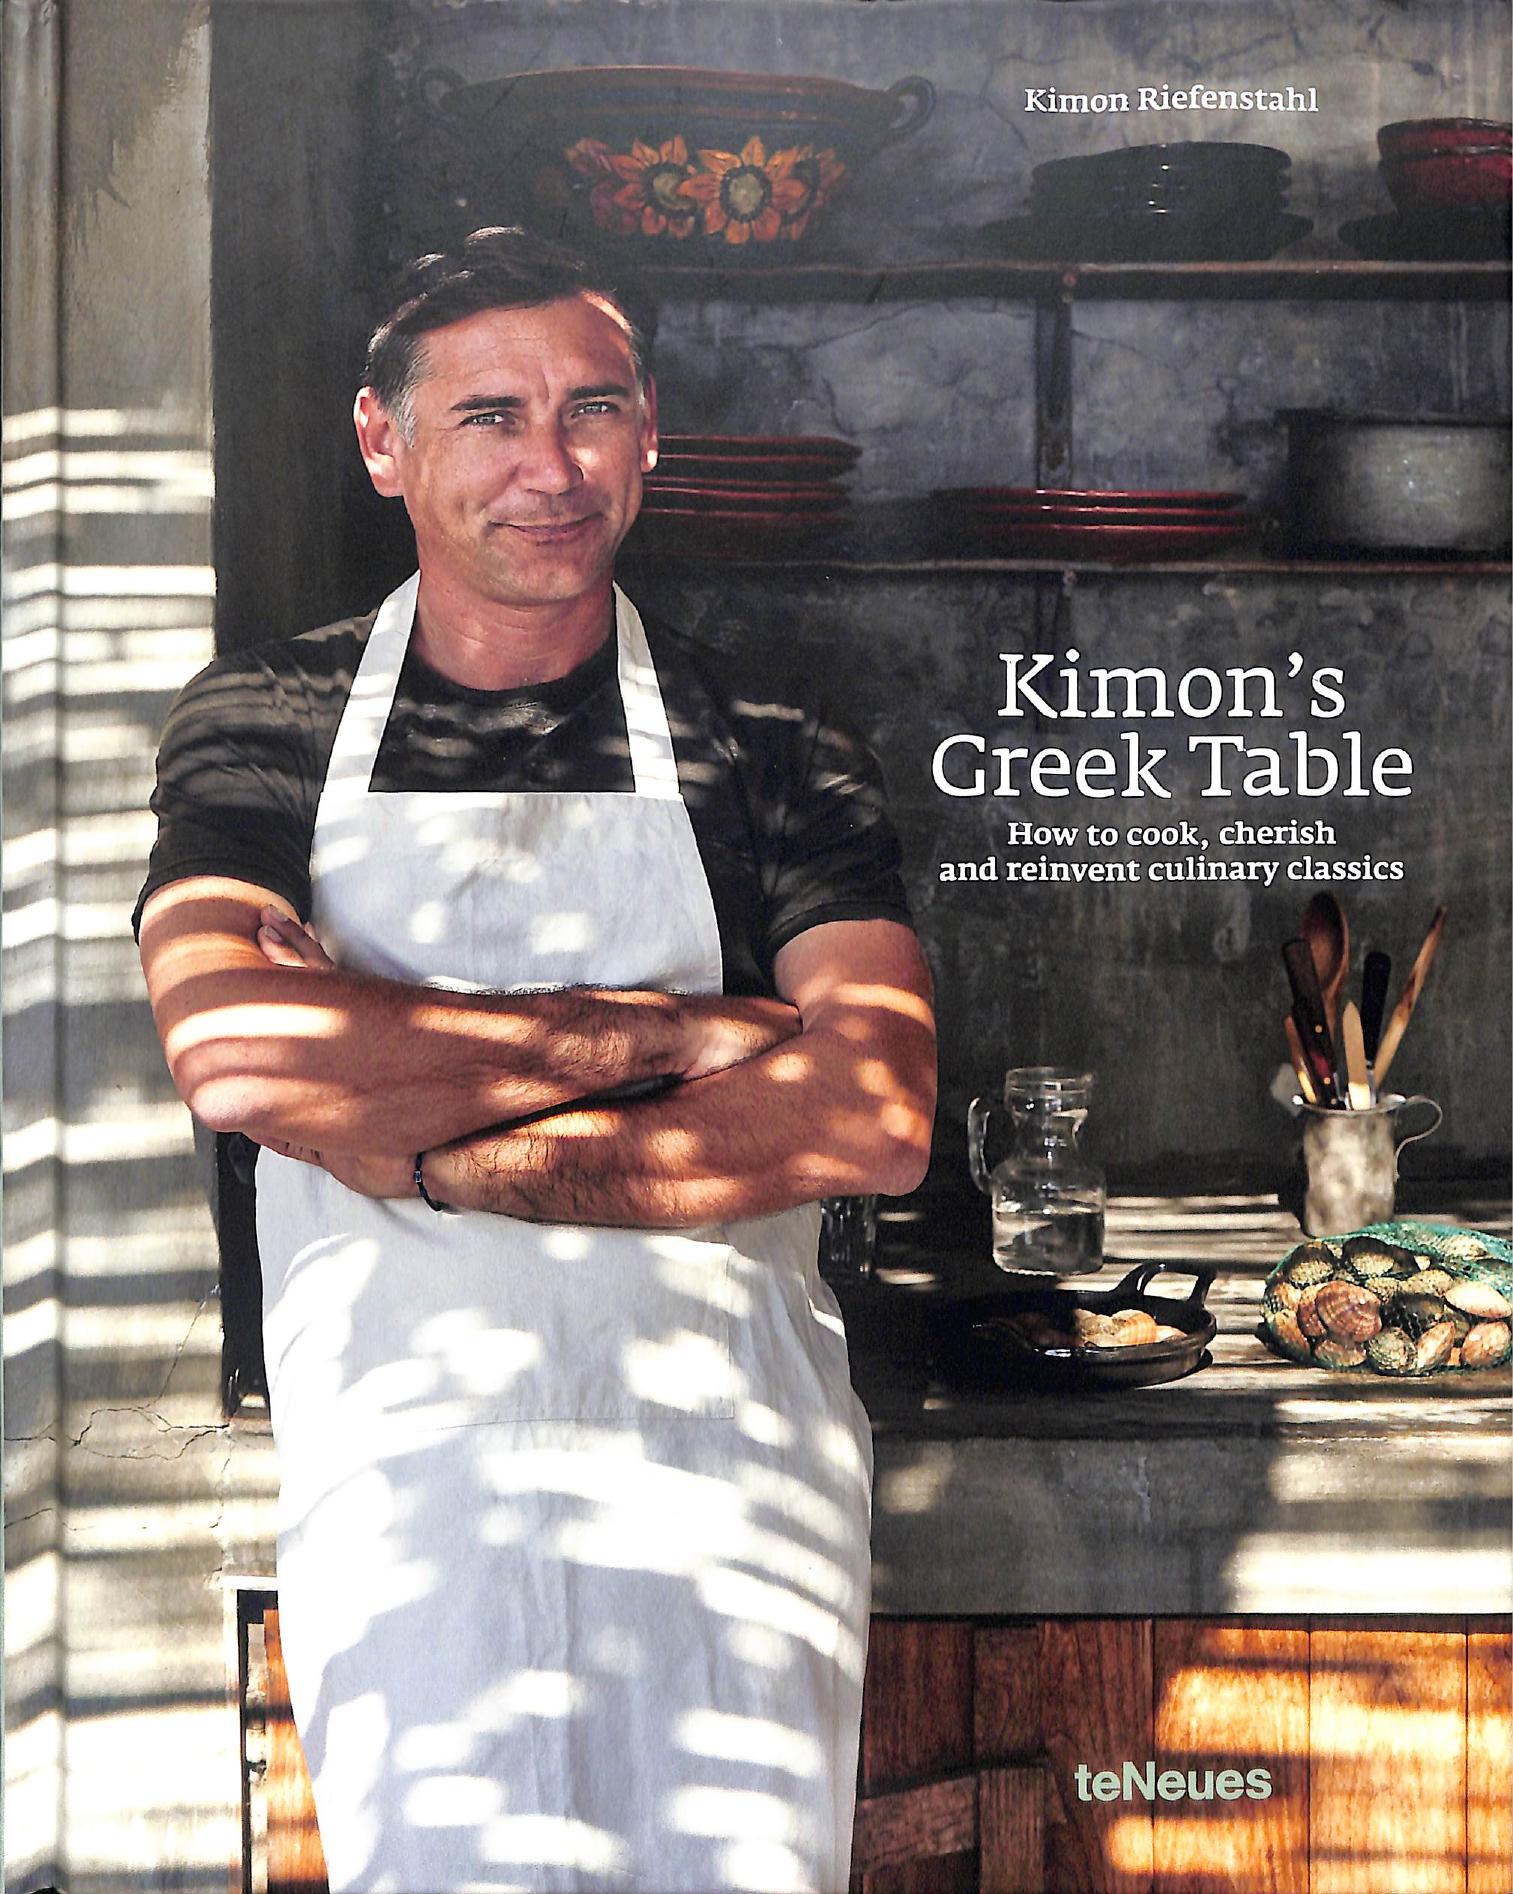 Kimon's Greek Table: How to cook, cherish, and reinvent culinary classics by Kimon Riefenstahl